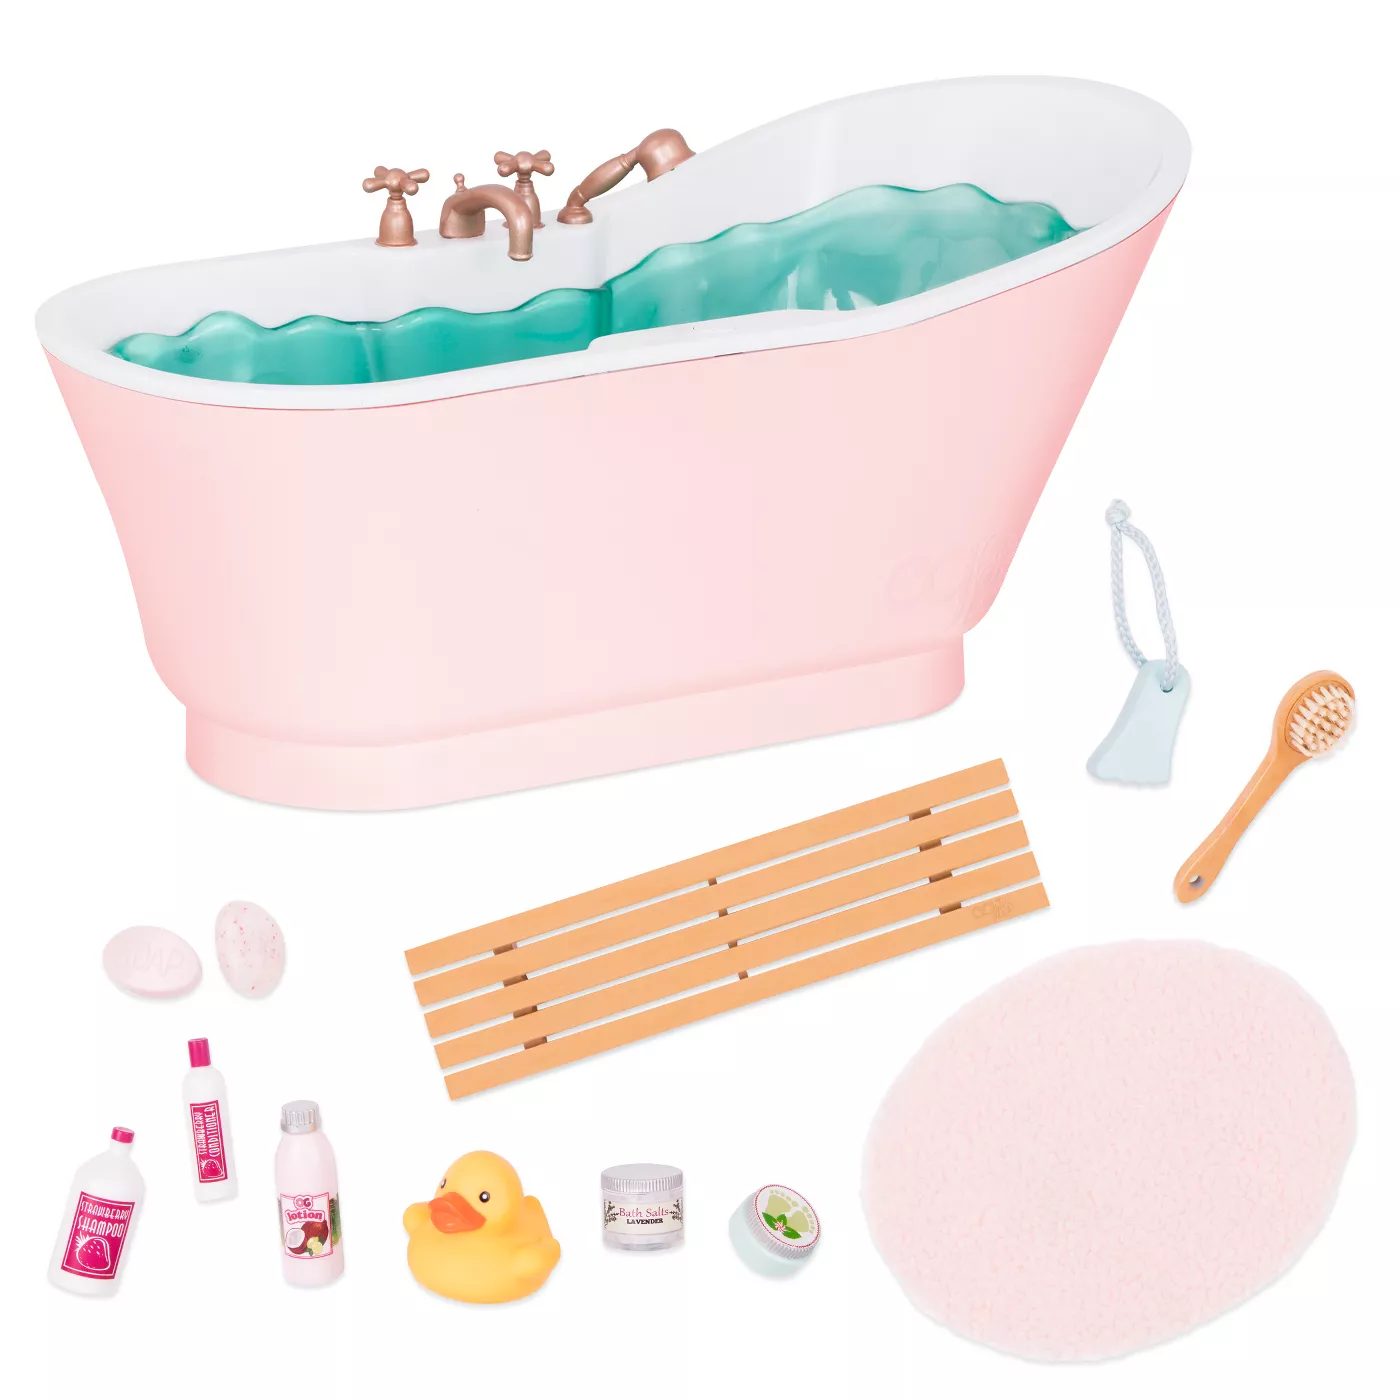 Our Generation Deluxe Bath & Bubbles Tub Set with Sounds - image 1 of 3